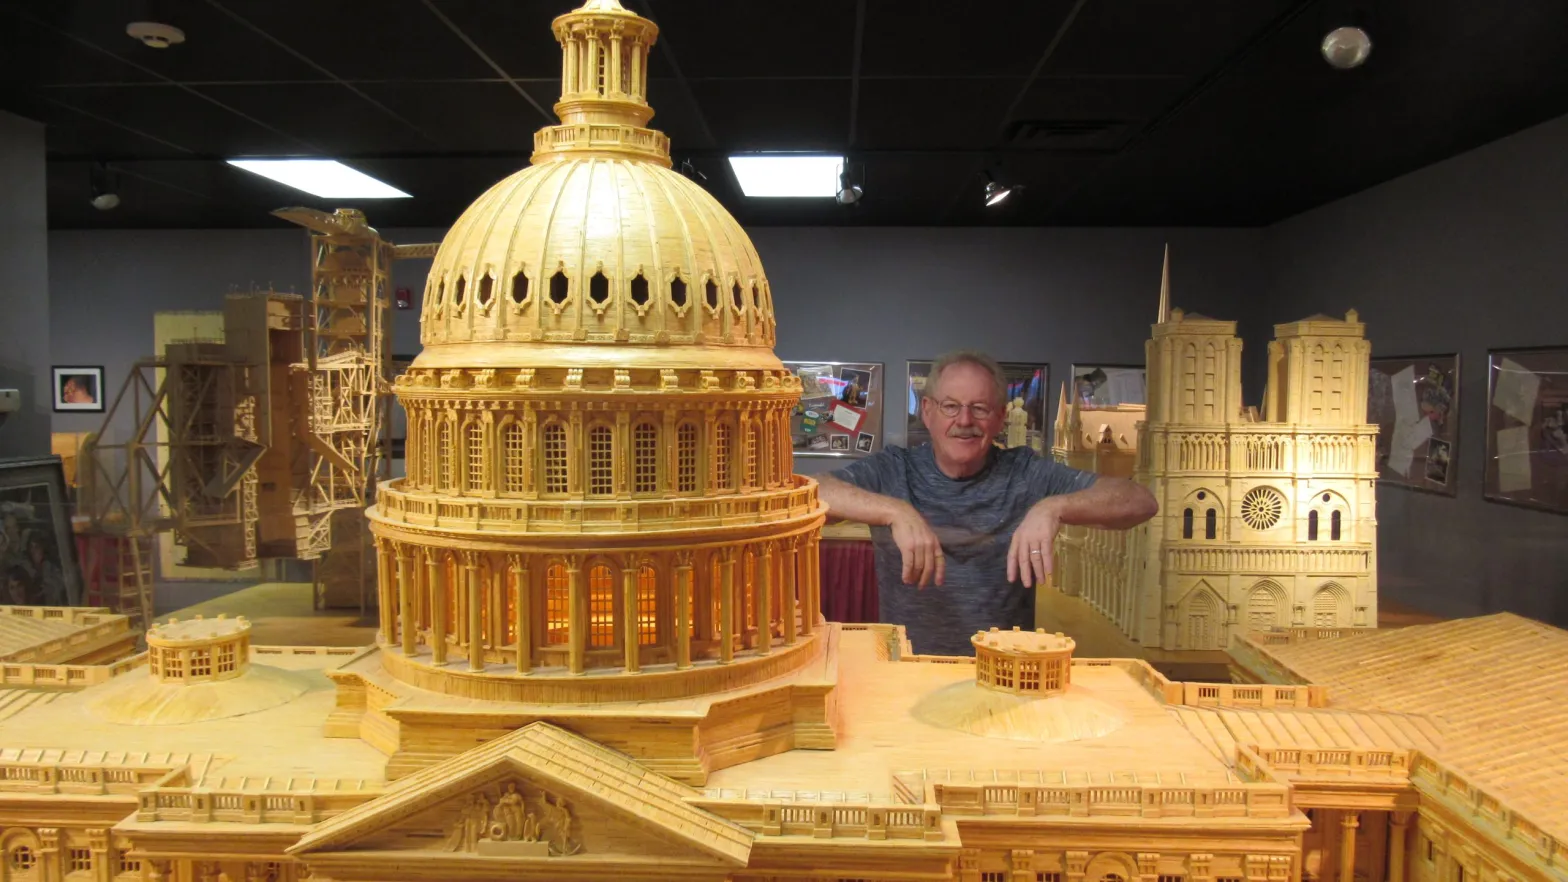 An older person poses with elbows resting on a glass barrier surrounding a model of the U.S. capitol that appears two heads taller than them.